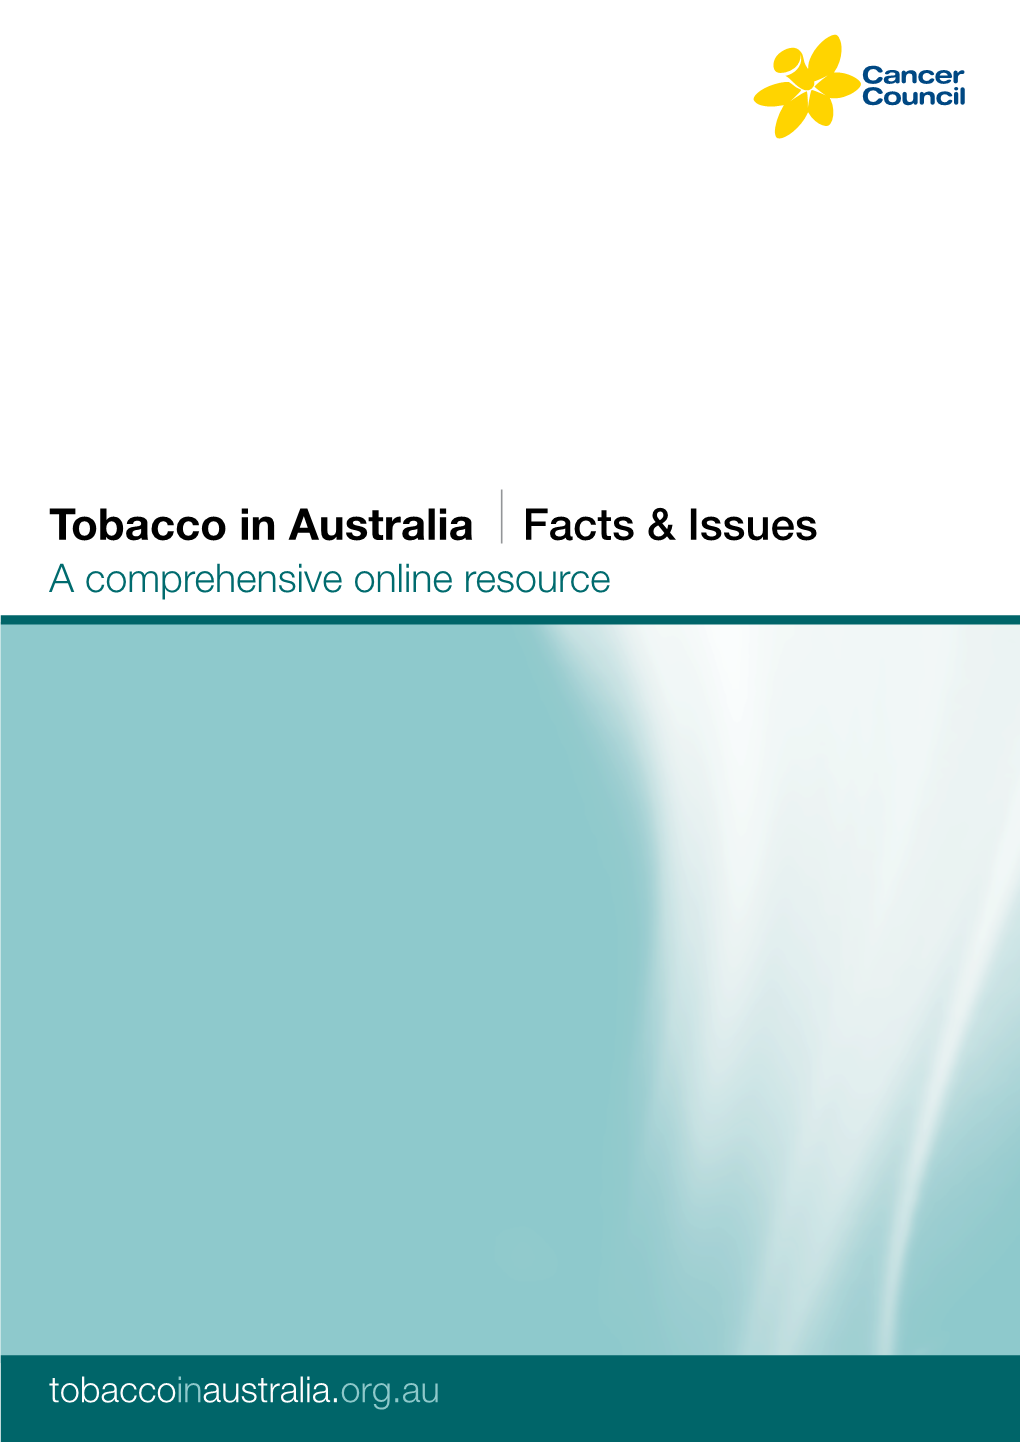 Tobacco in Australia Facts & Issues